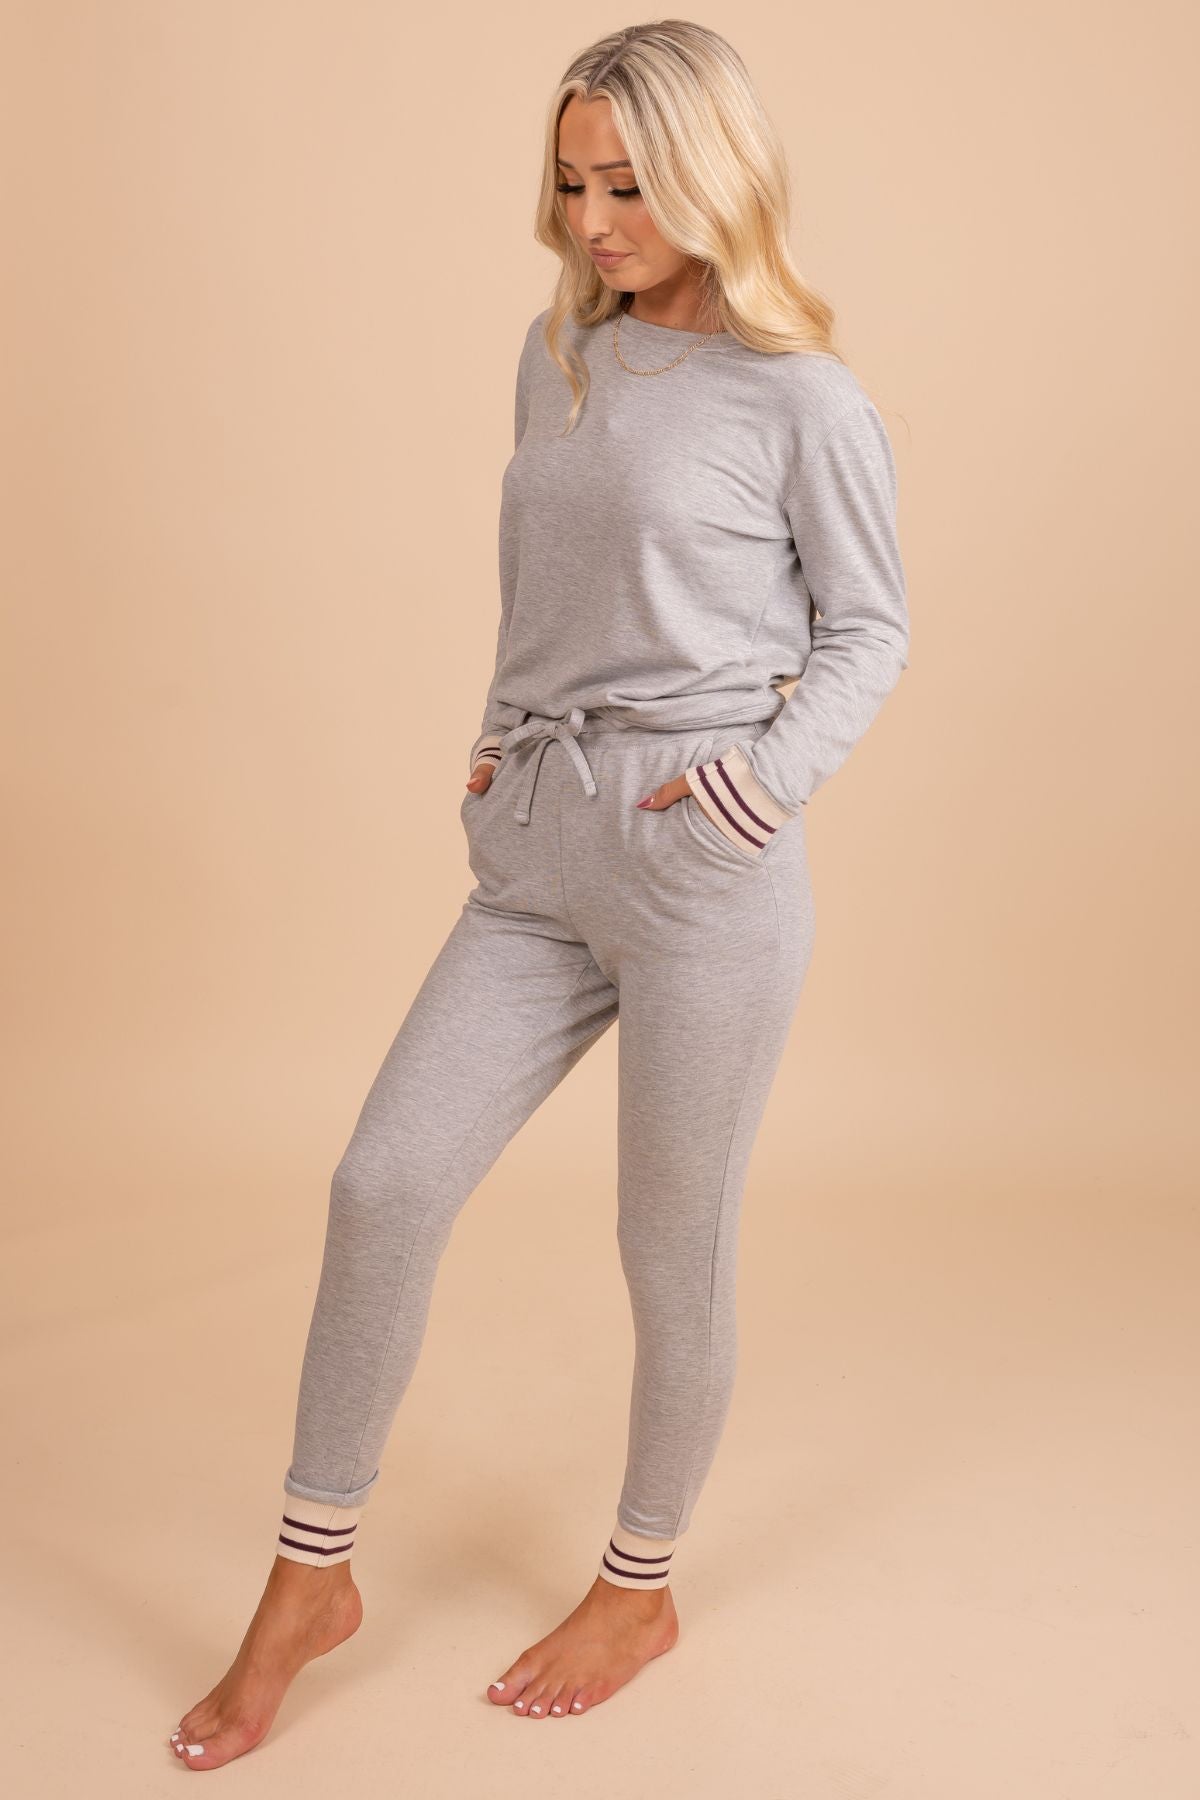 Cute and Comfortable Boutique Loungewear for Women